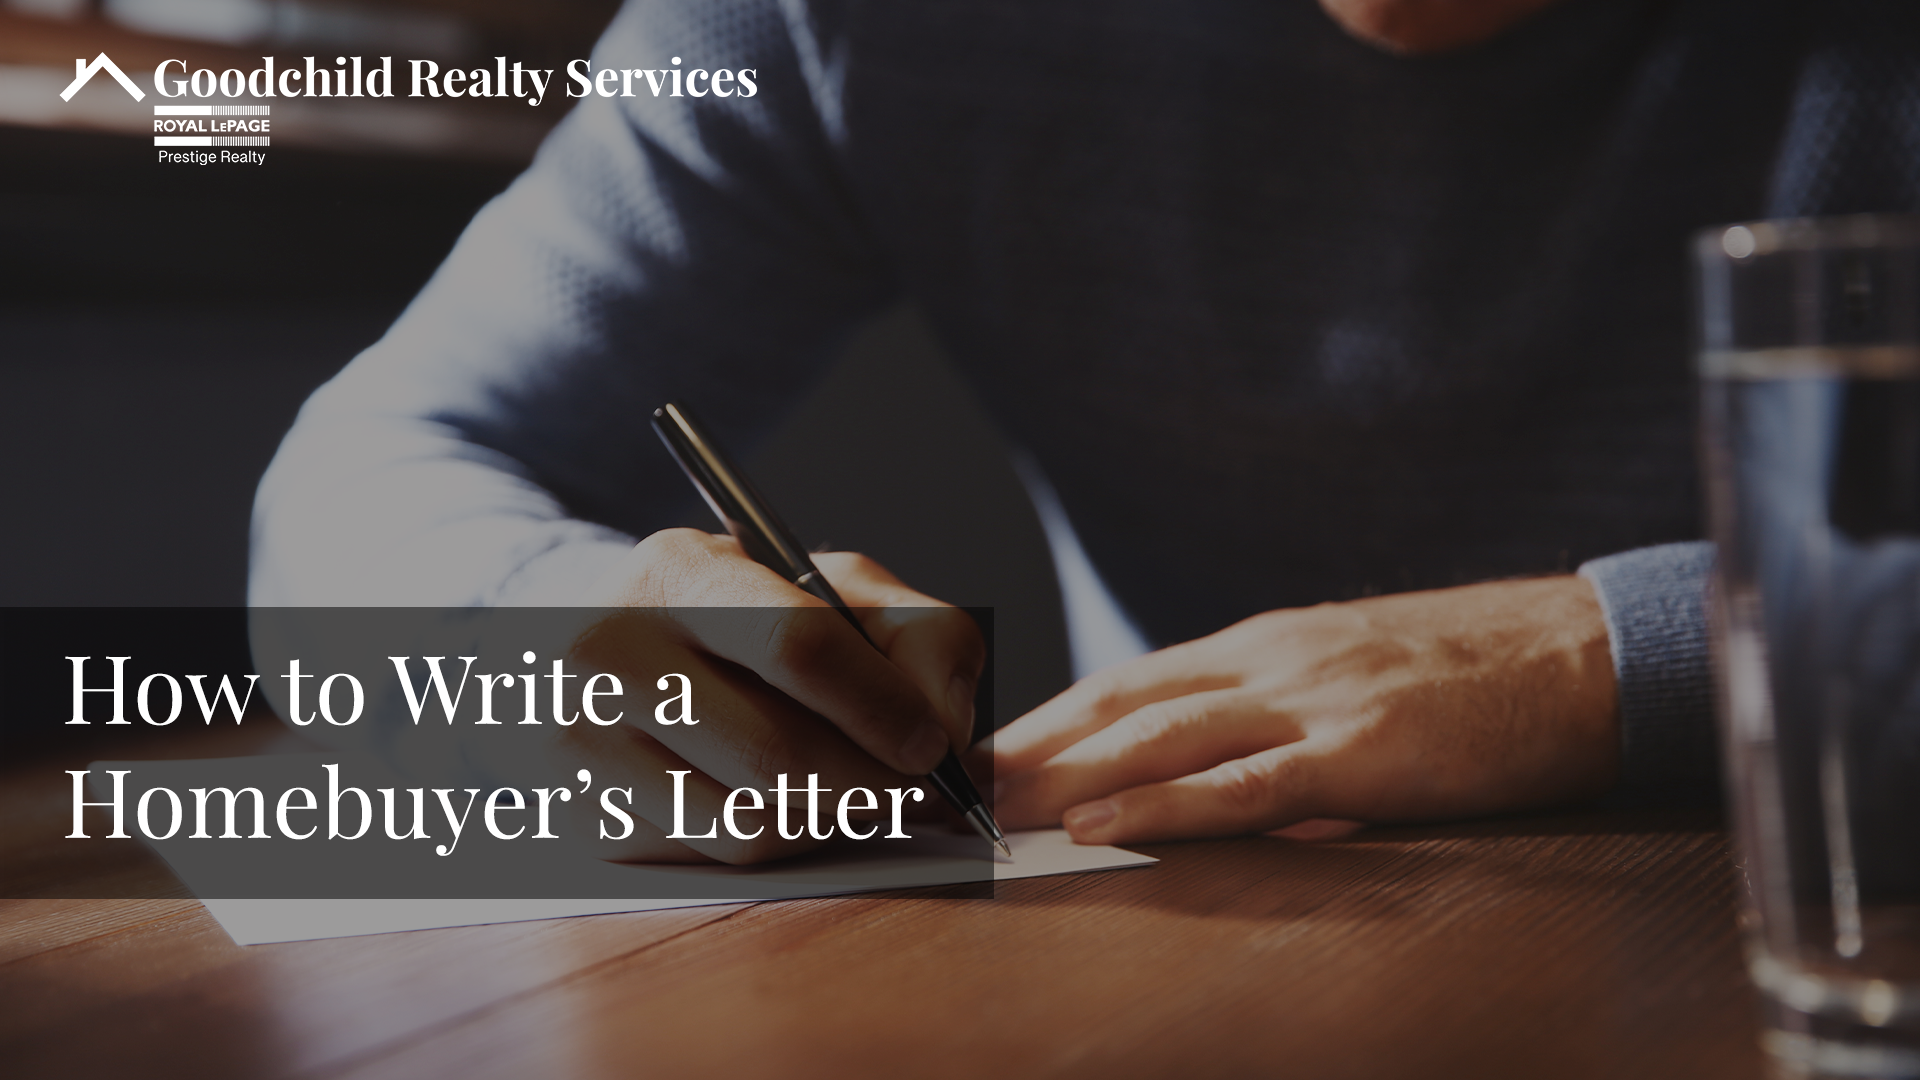 How to Write a Homebuyer's Letter